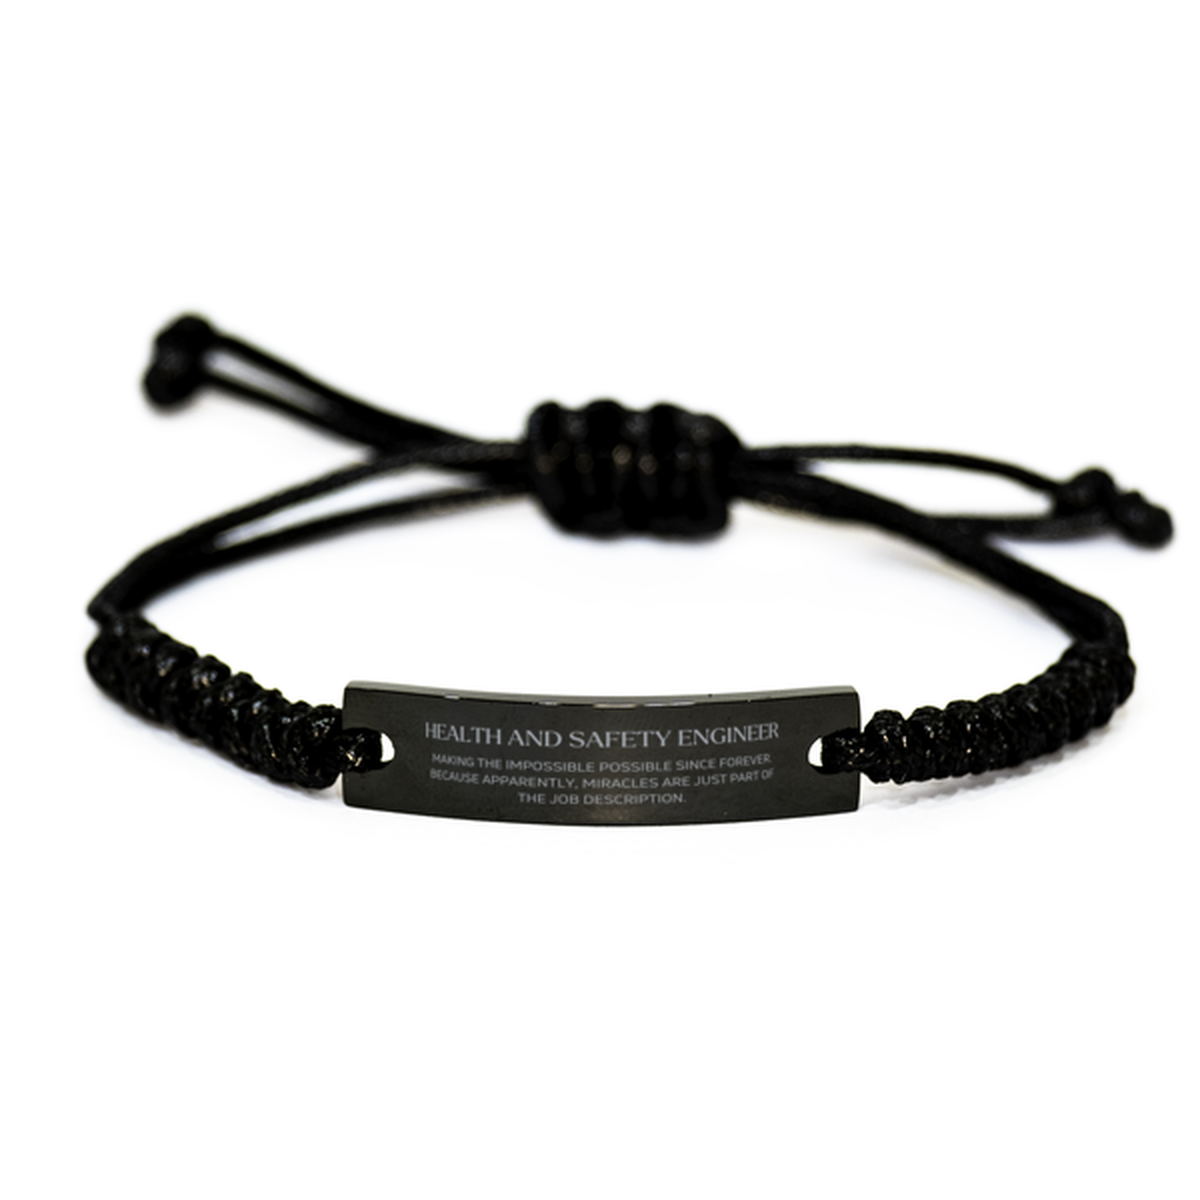 Funny Health and Safety Engineer Gifts, Miracles are just part of the job description, Inspirational Birthday Black Rope Bracelet For Health and Safety Engineer, Men, Women, Coworkers, Friends, Boss